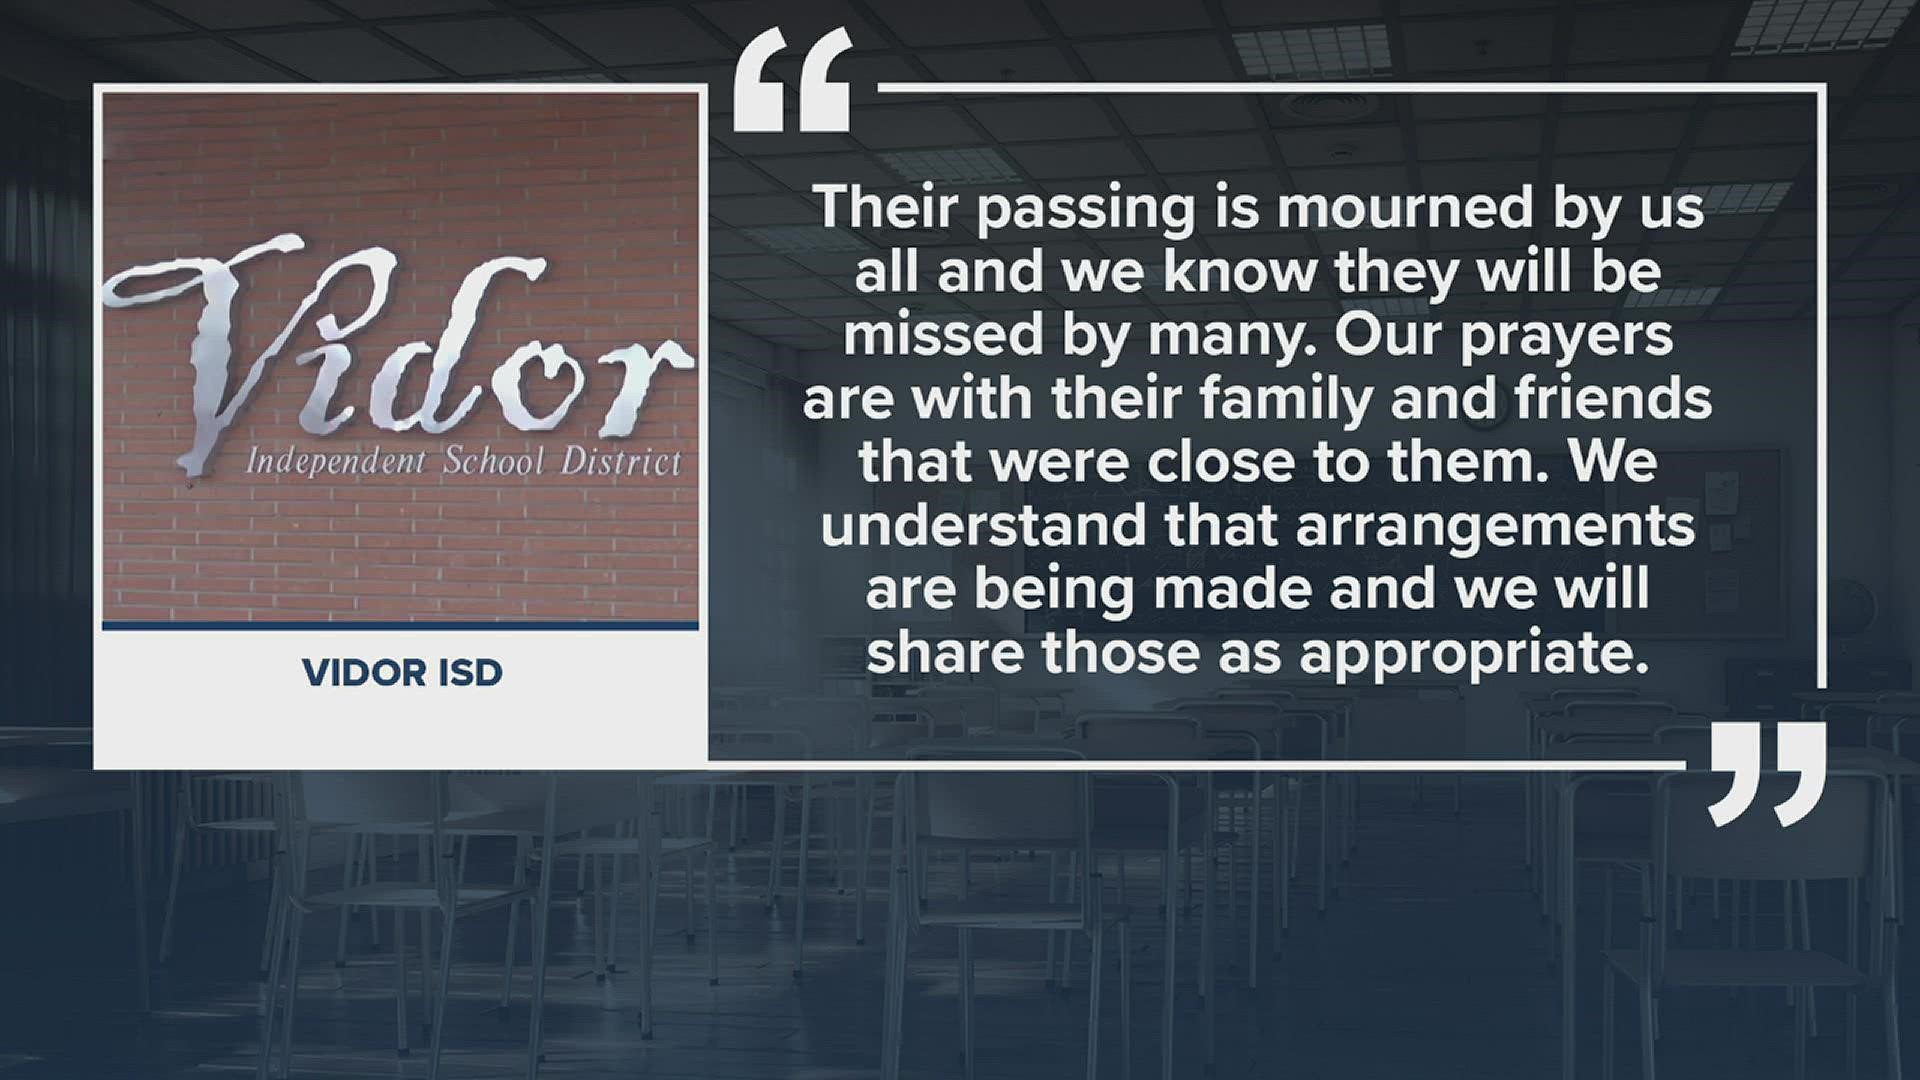 "Vidor ISD was heartbroken to hear the news about John Castilaw III and Blake Post."